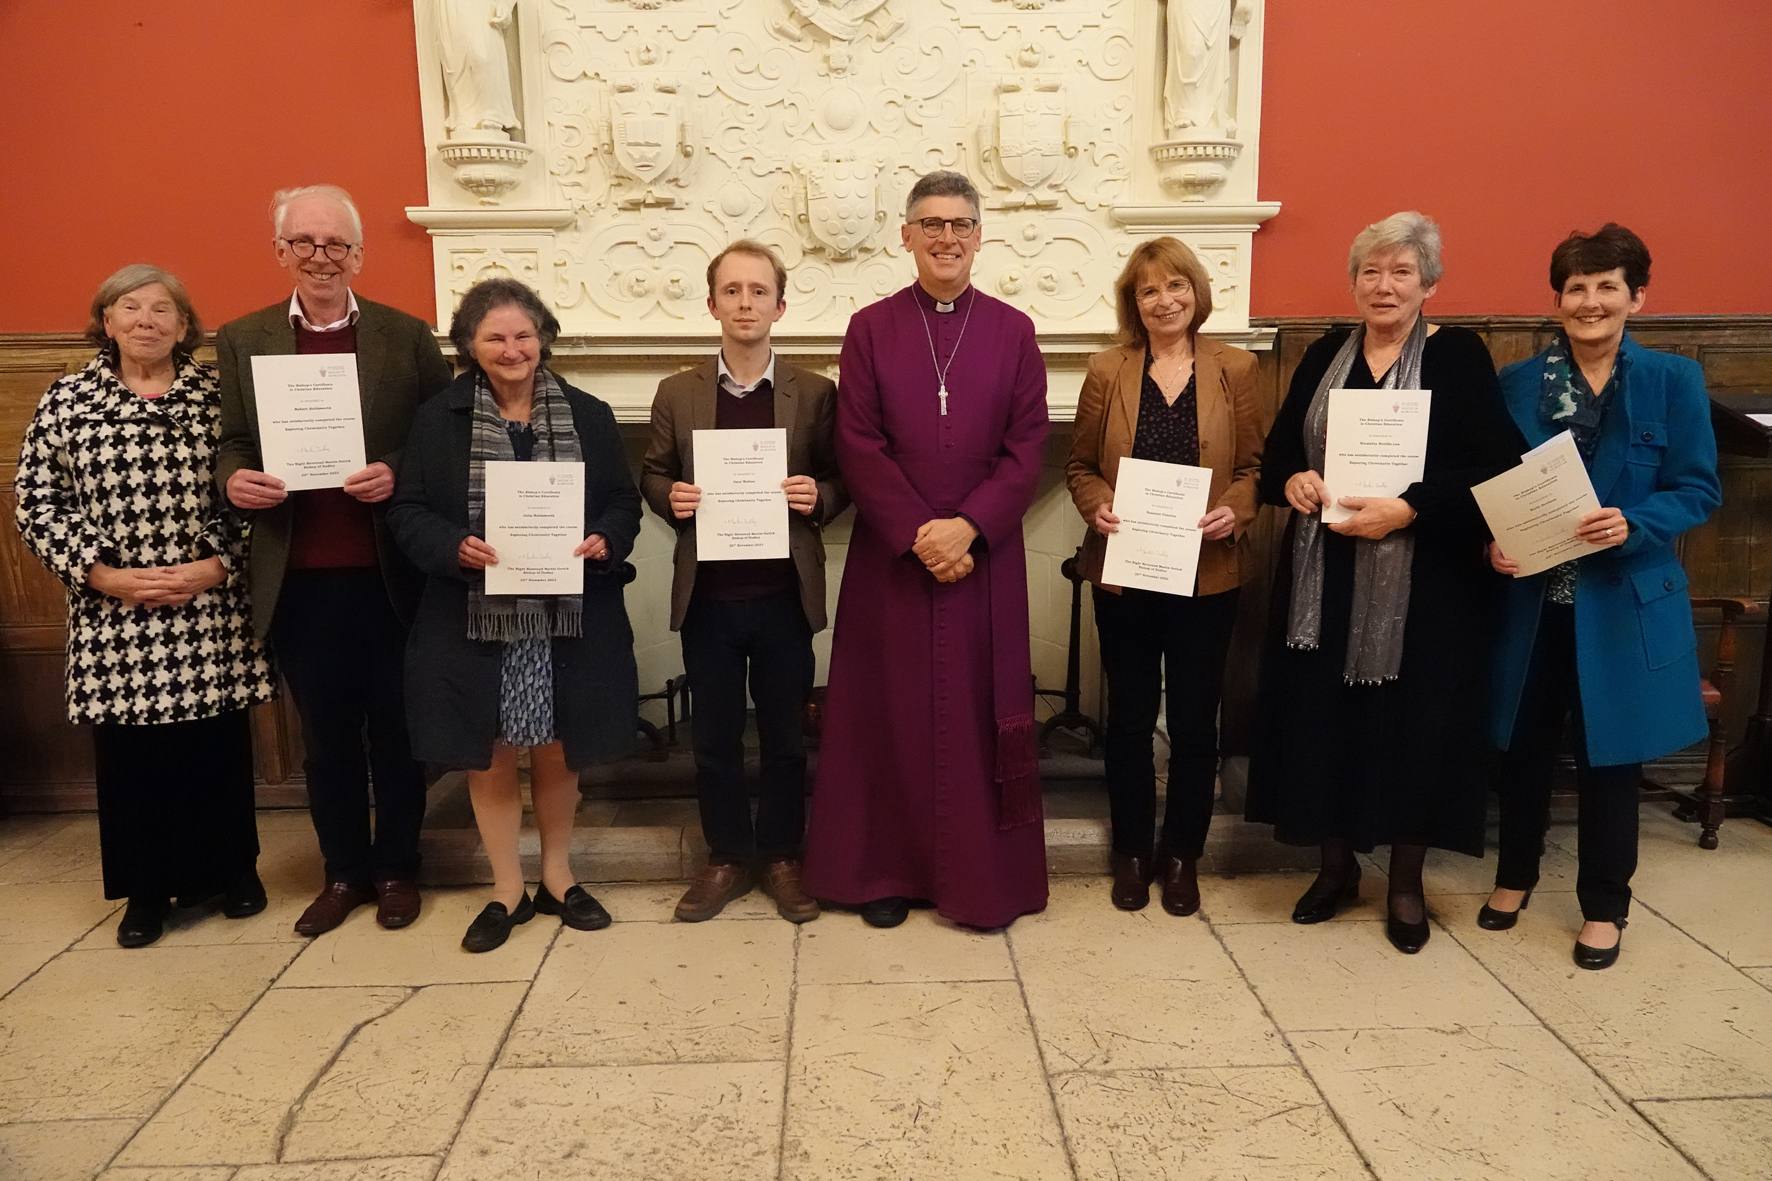 The group of people who completed their Bishops certificate in Worcester standing with Bishop Martin